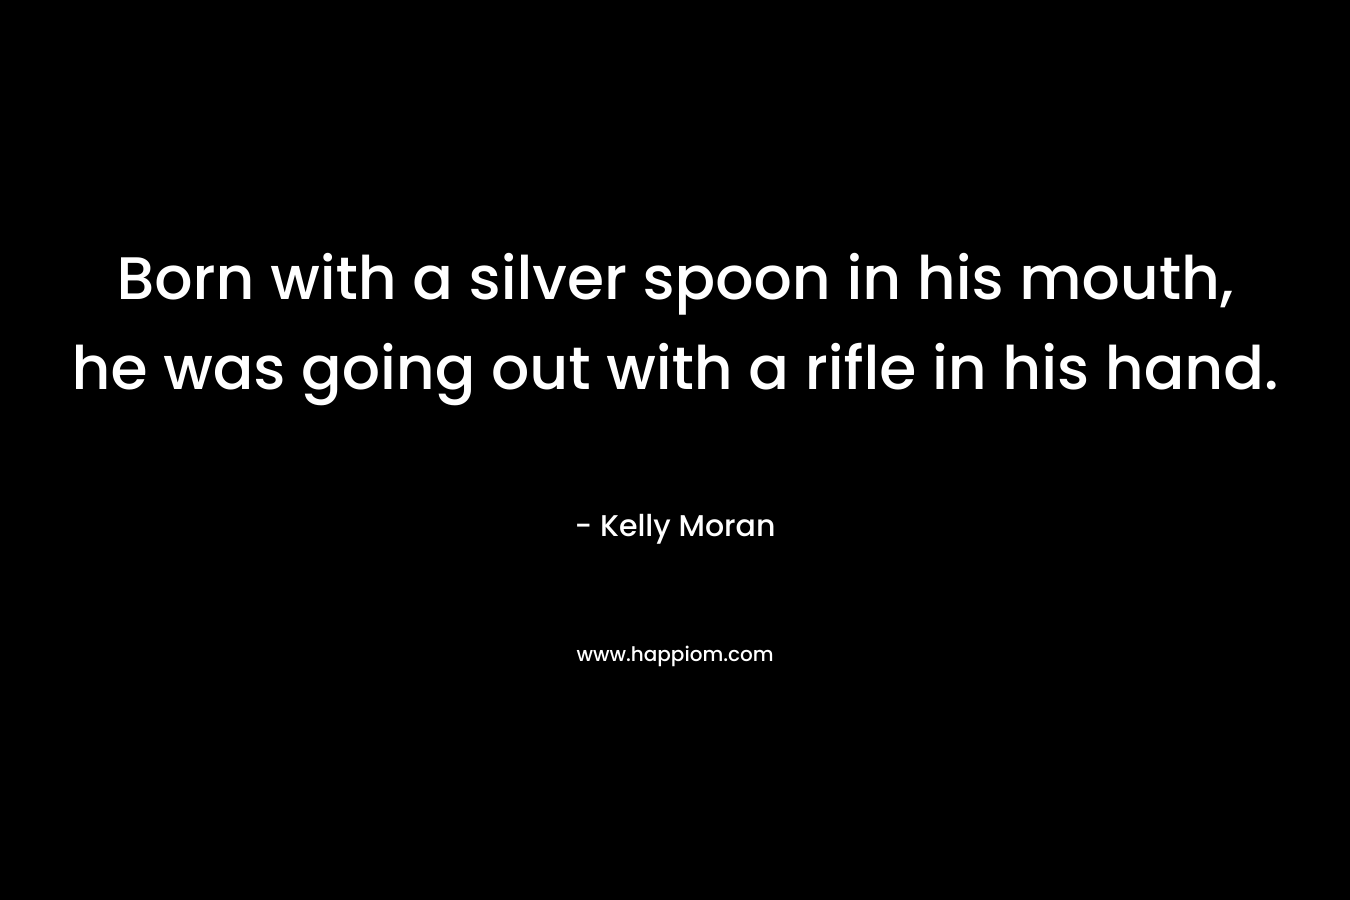 Born with a silver spoon in his mouth, he was going out with a rifle in his hand.